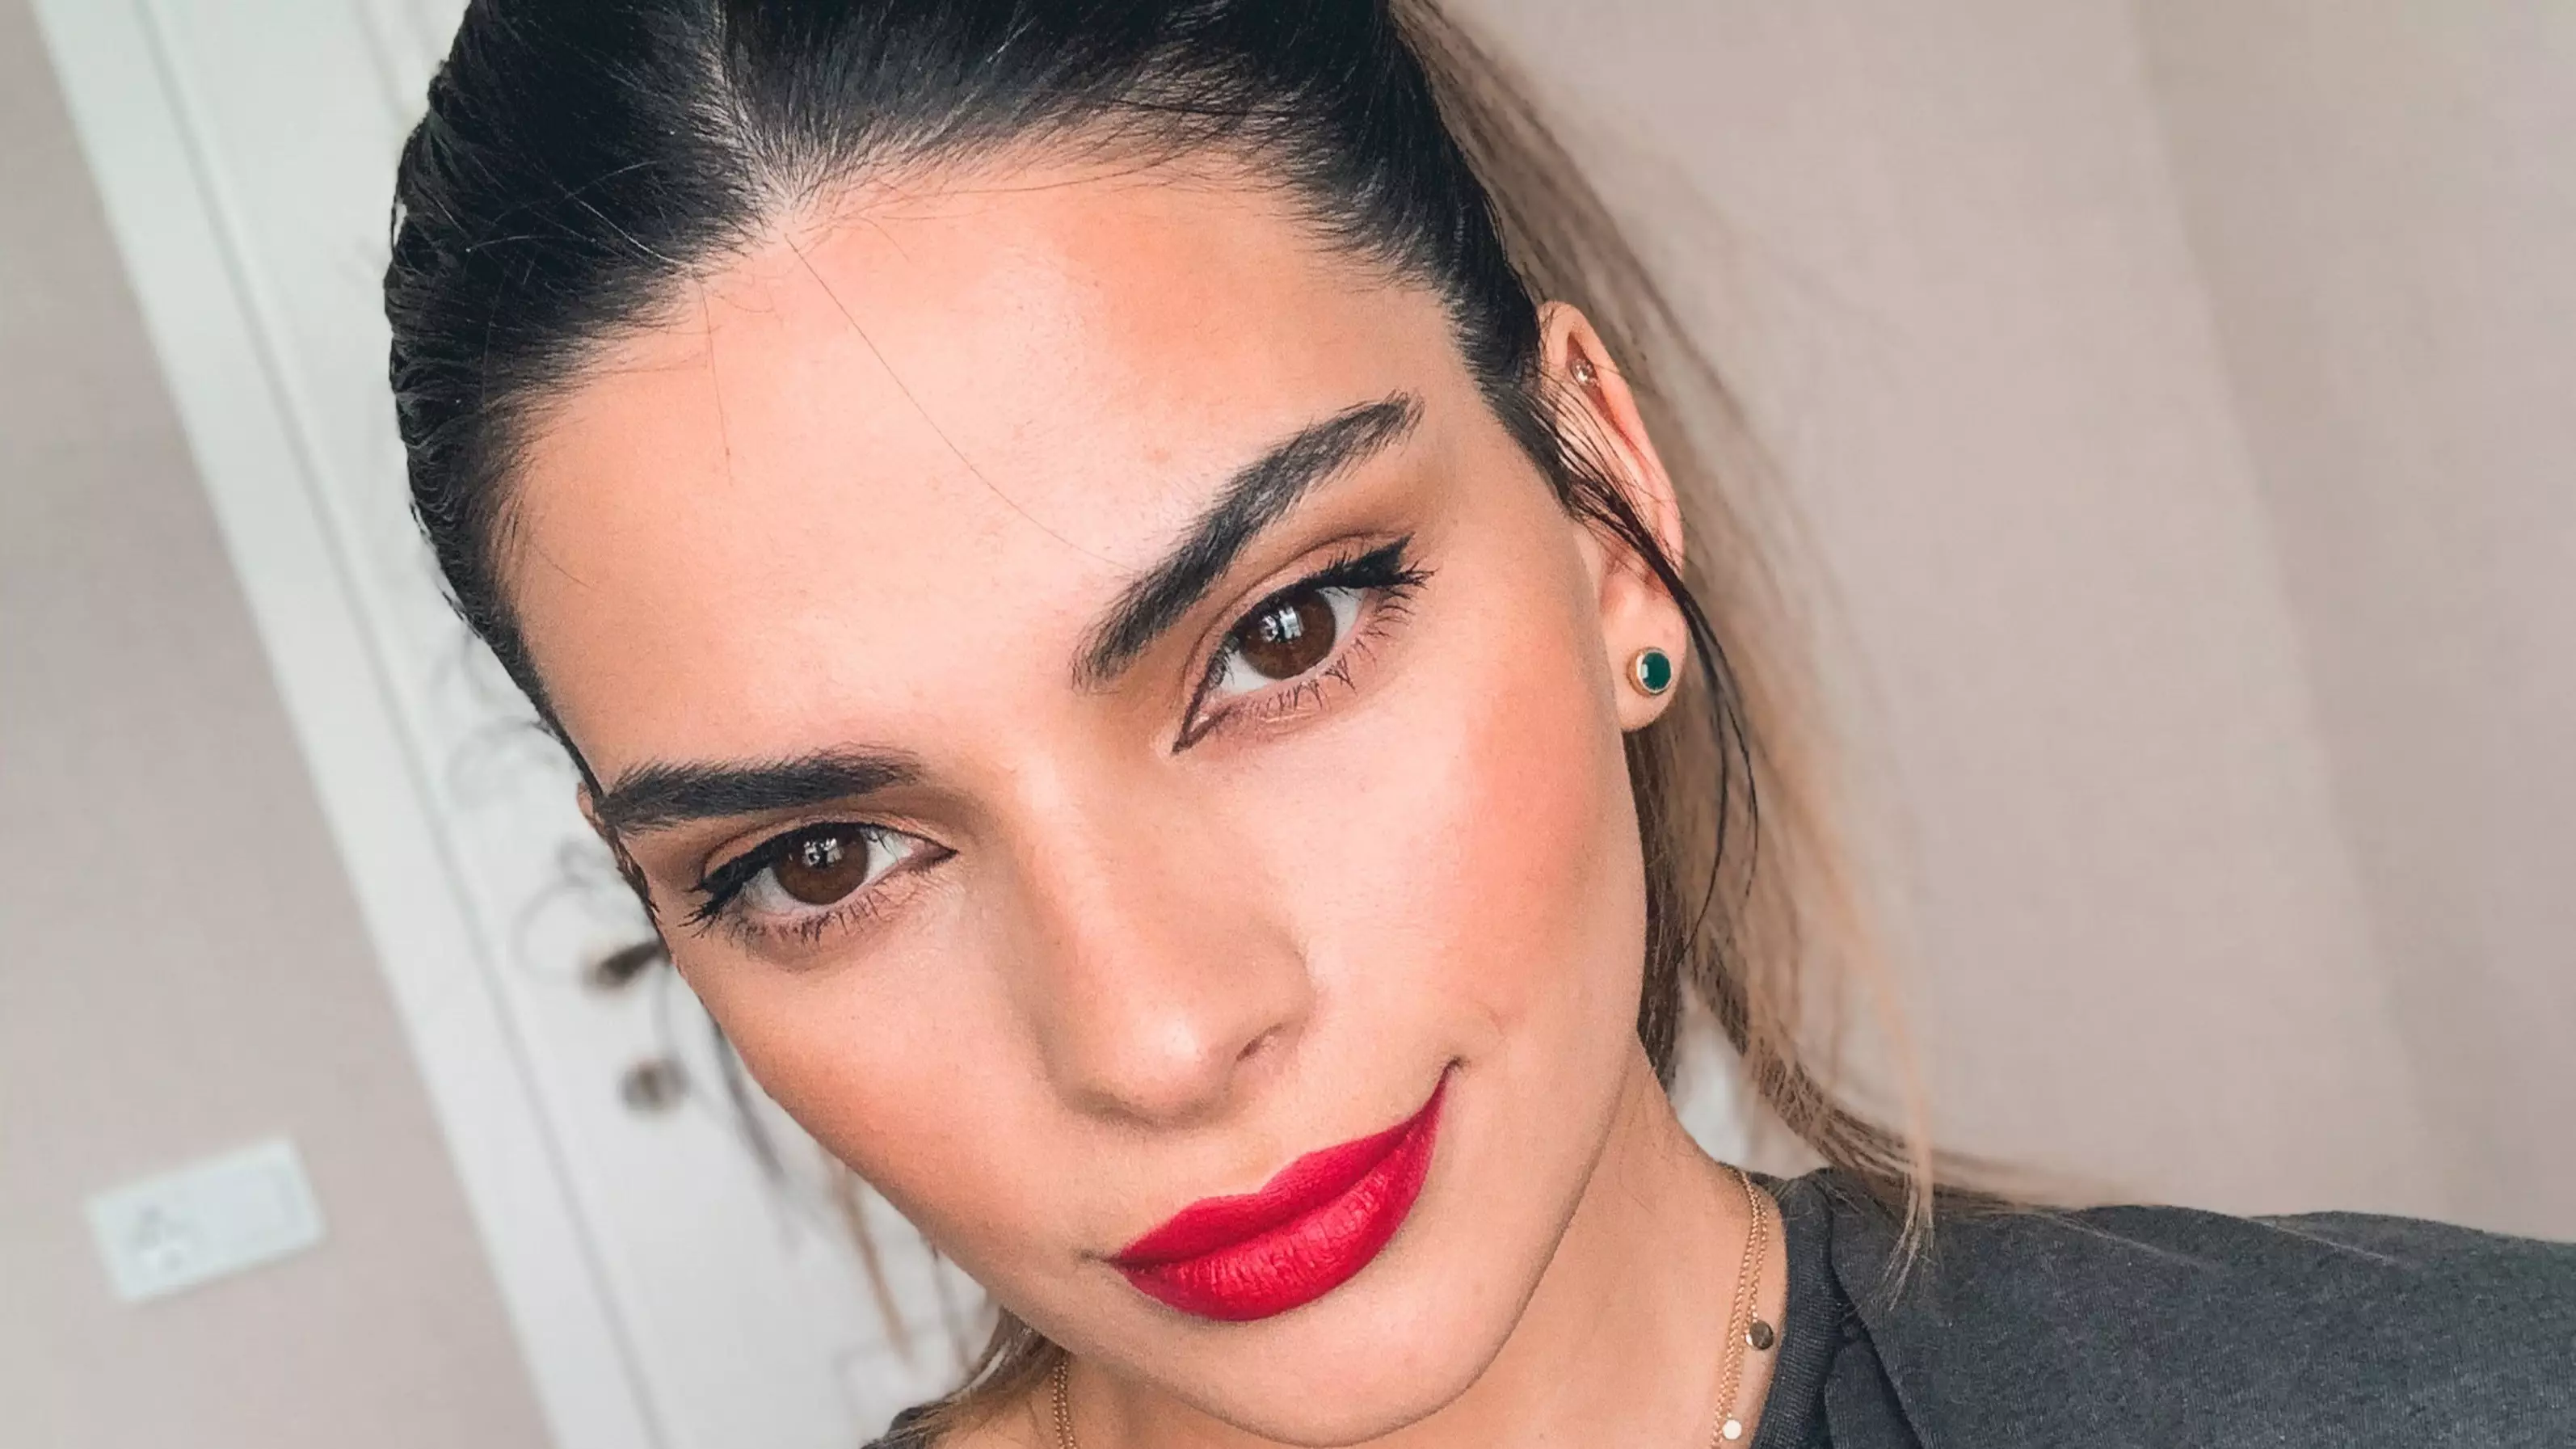 Woman Shares Incredible Resemblance To Kendall Jenner 